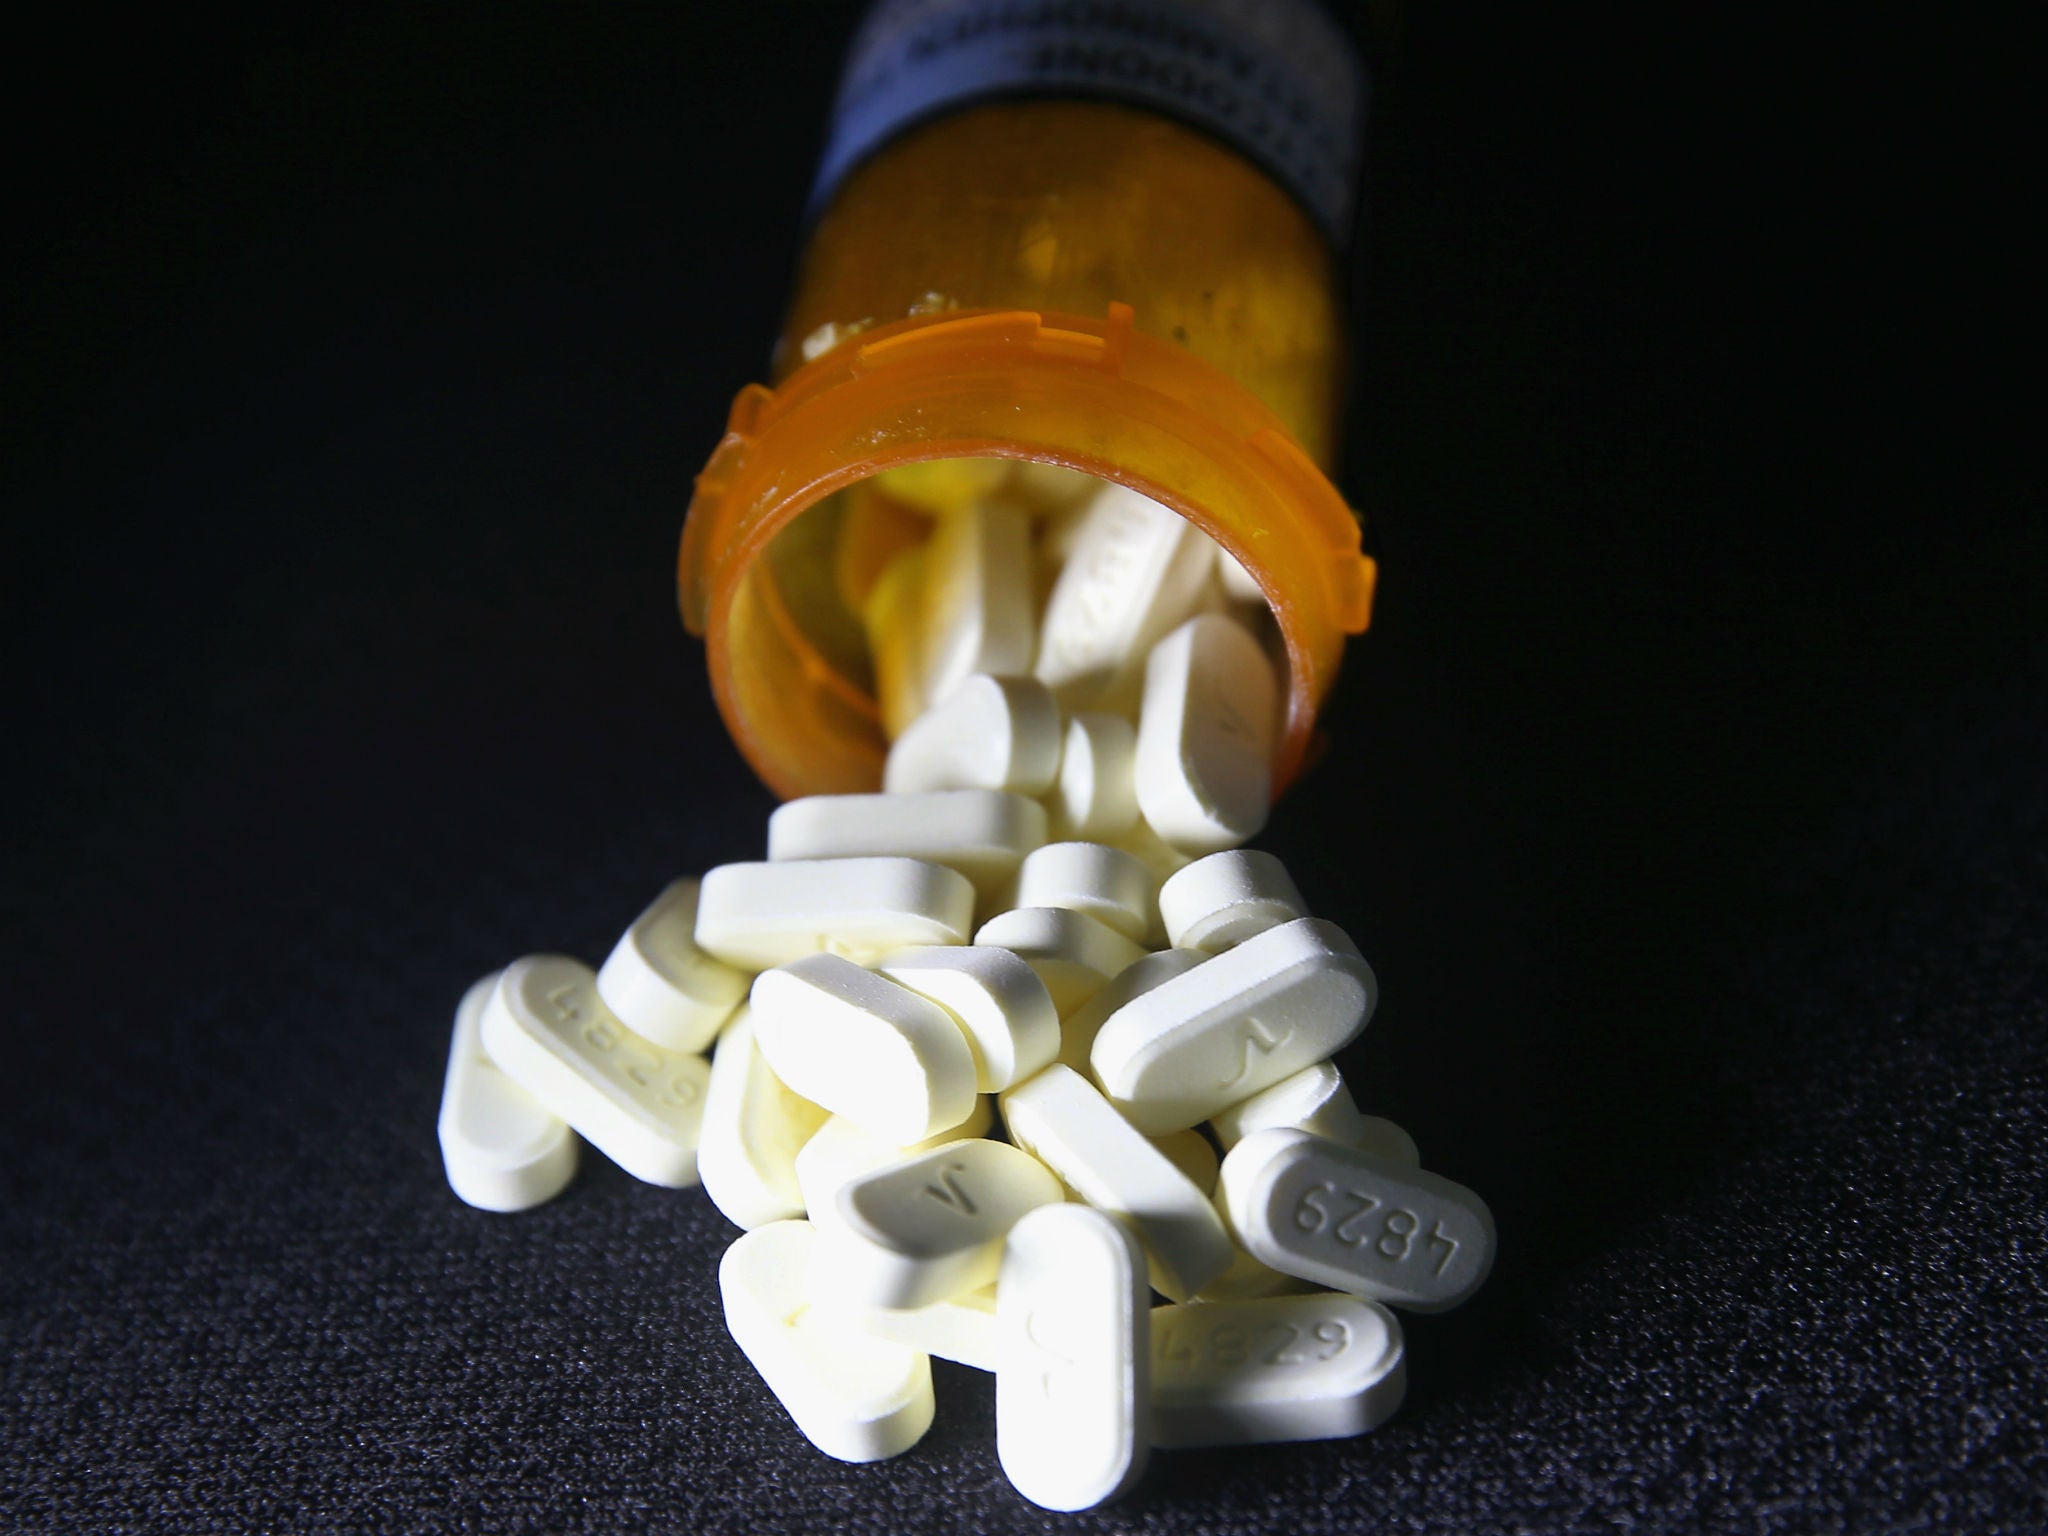 Experts consider opioid crisis the worst drug epidemic in American history